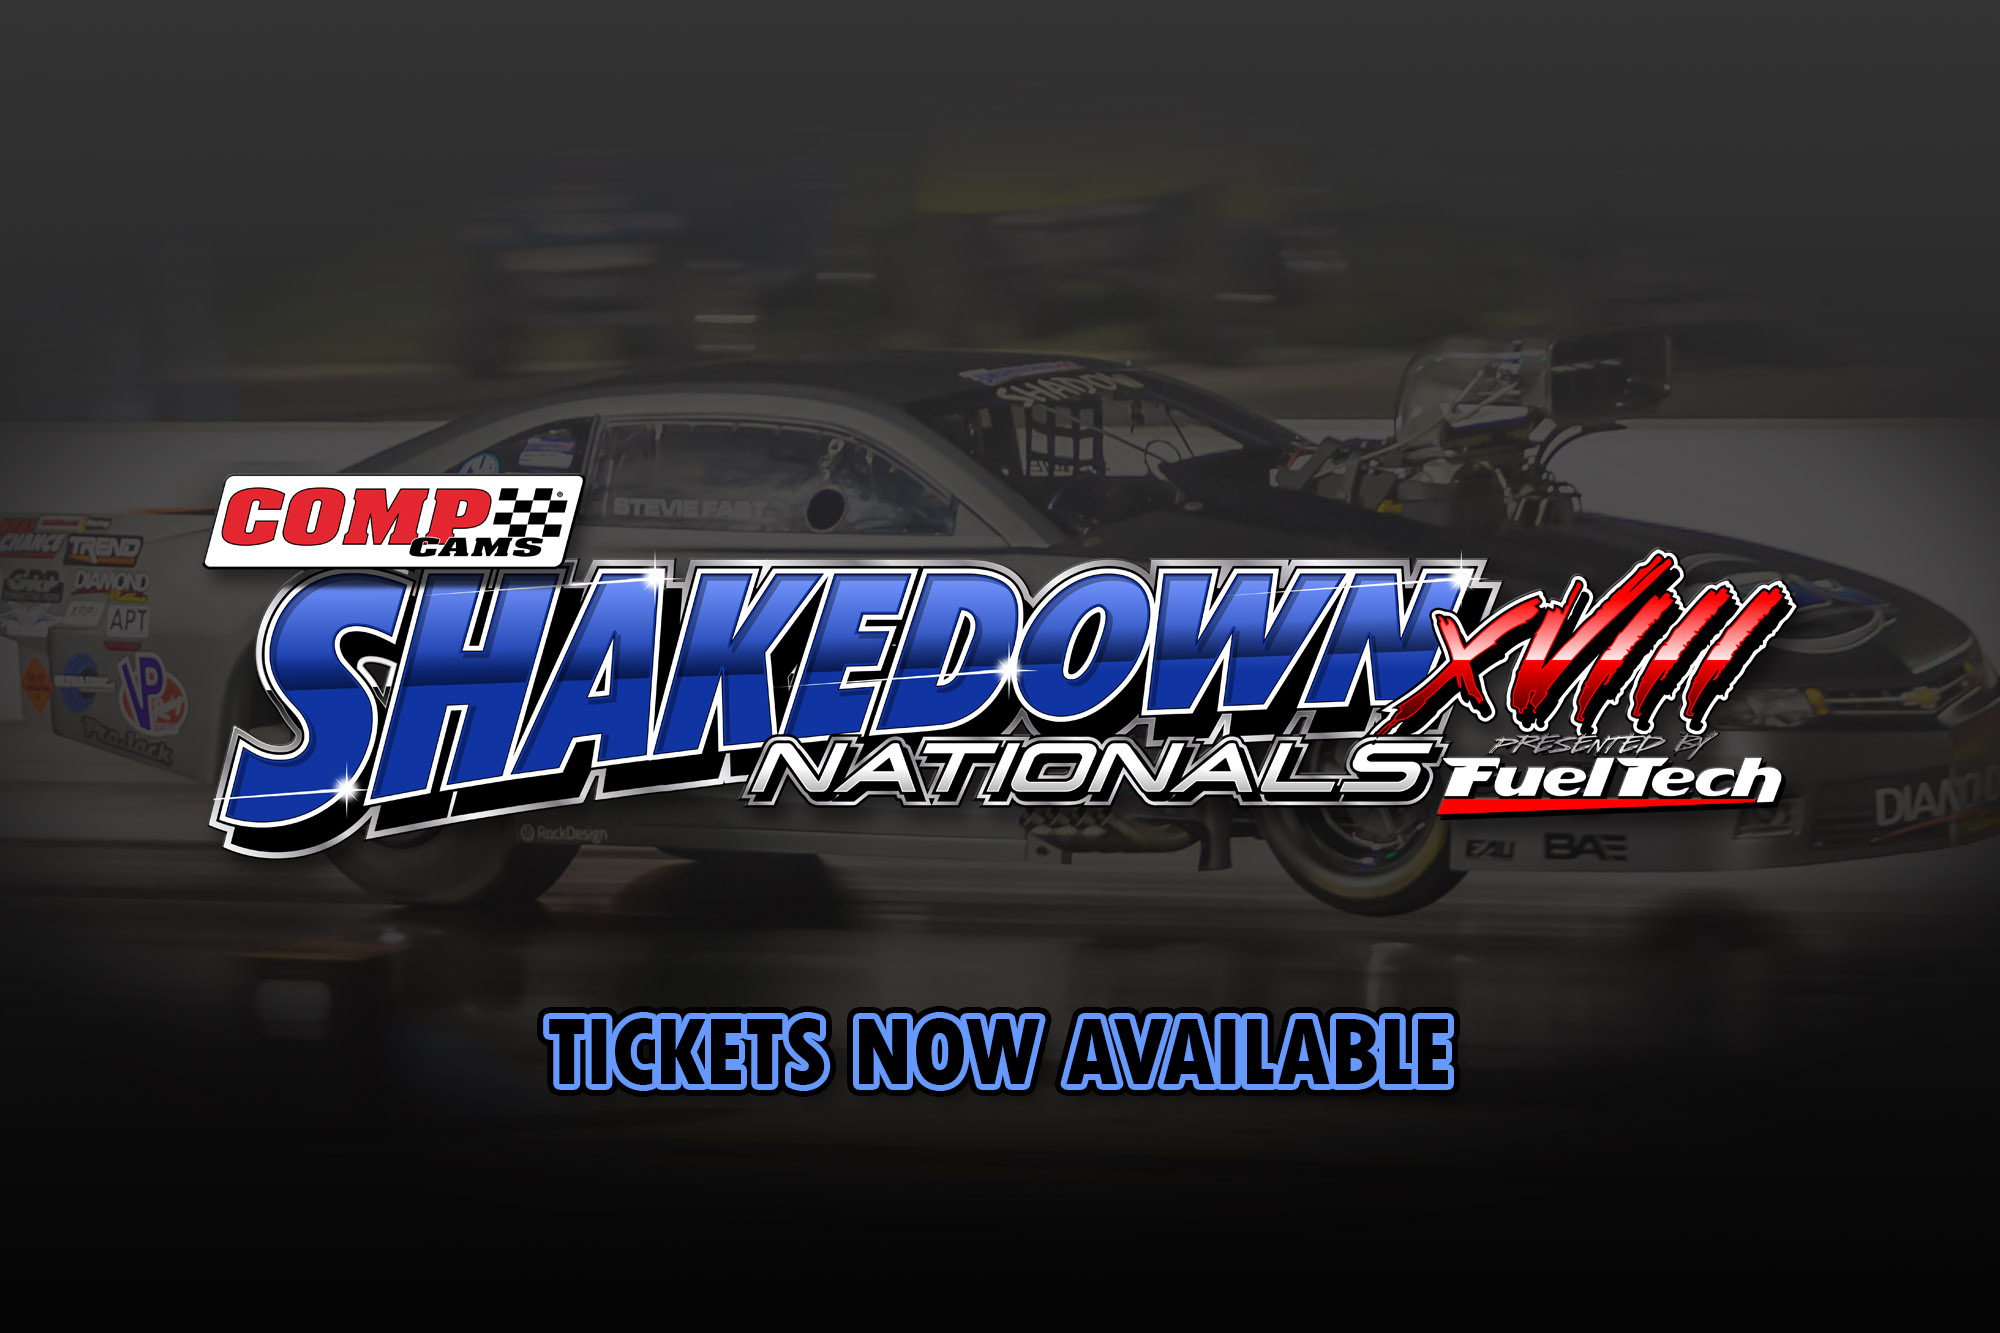 Pre-Entry is Now Available for COMP Cams Shakedown Nationals XVIII, presented by: FuelTech